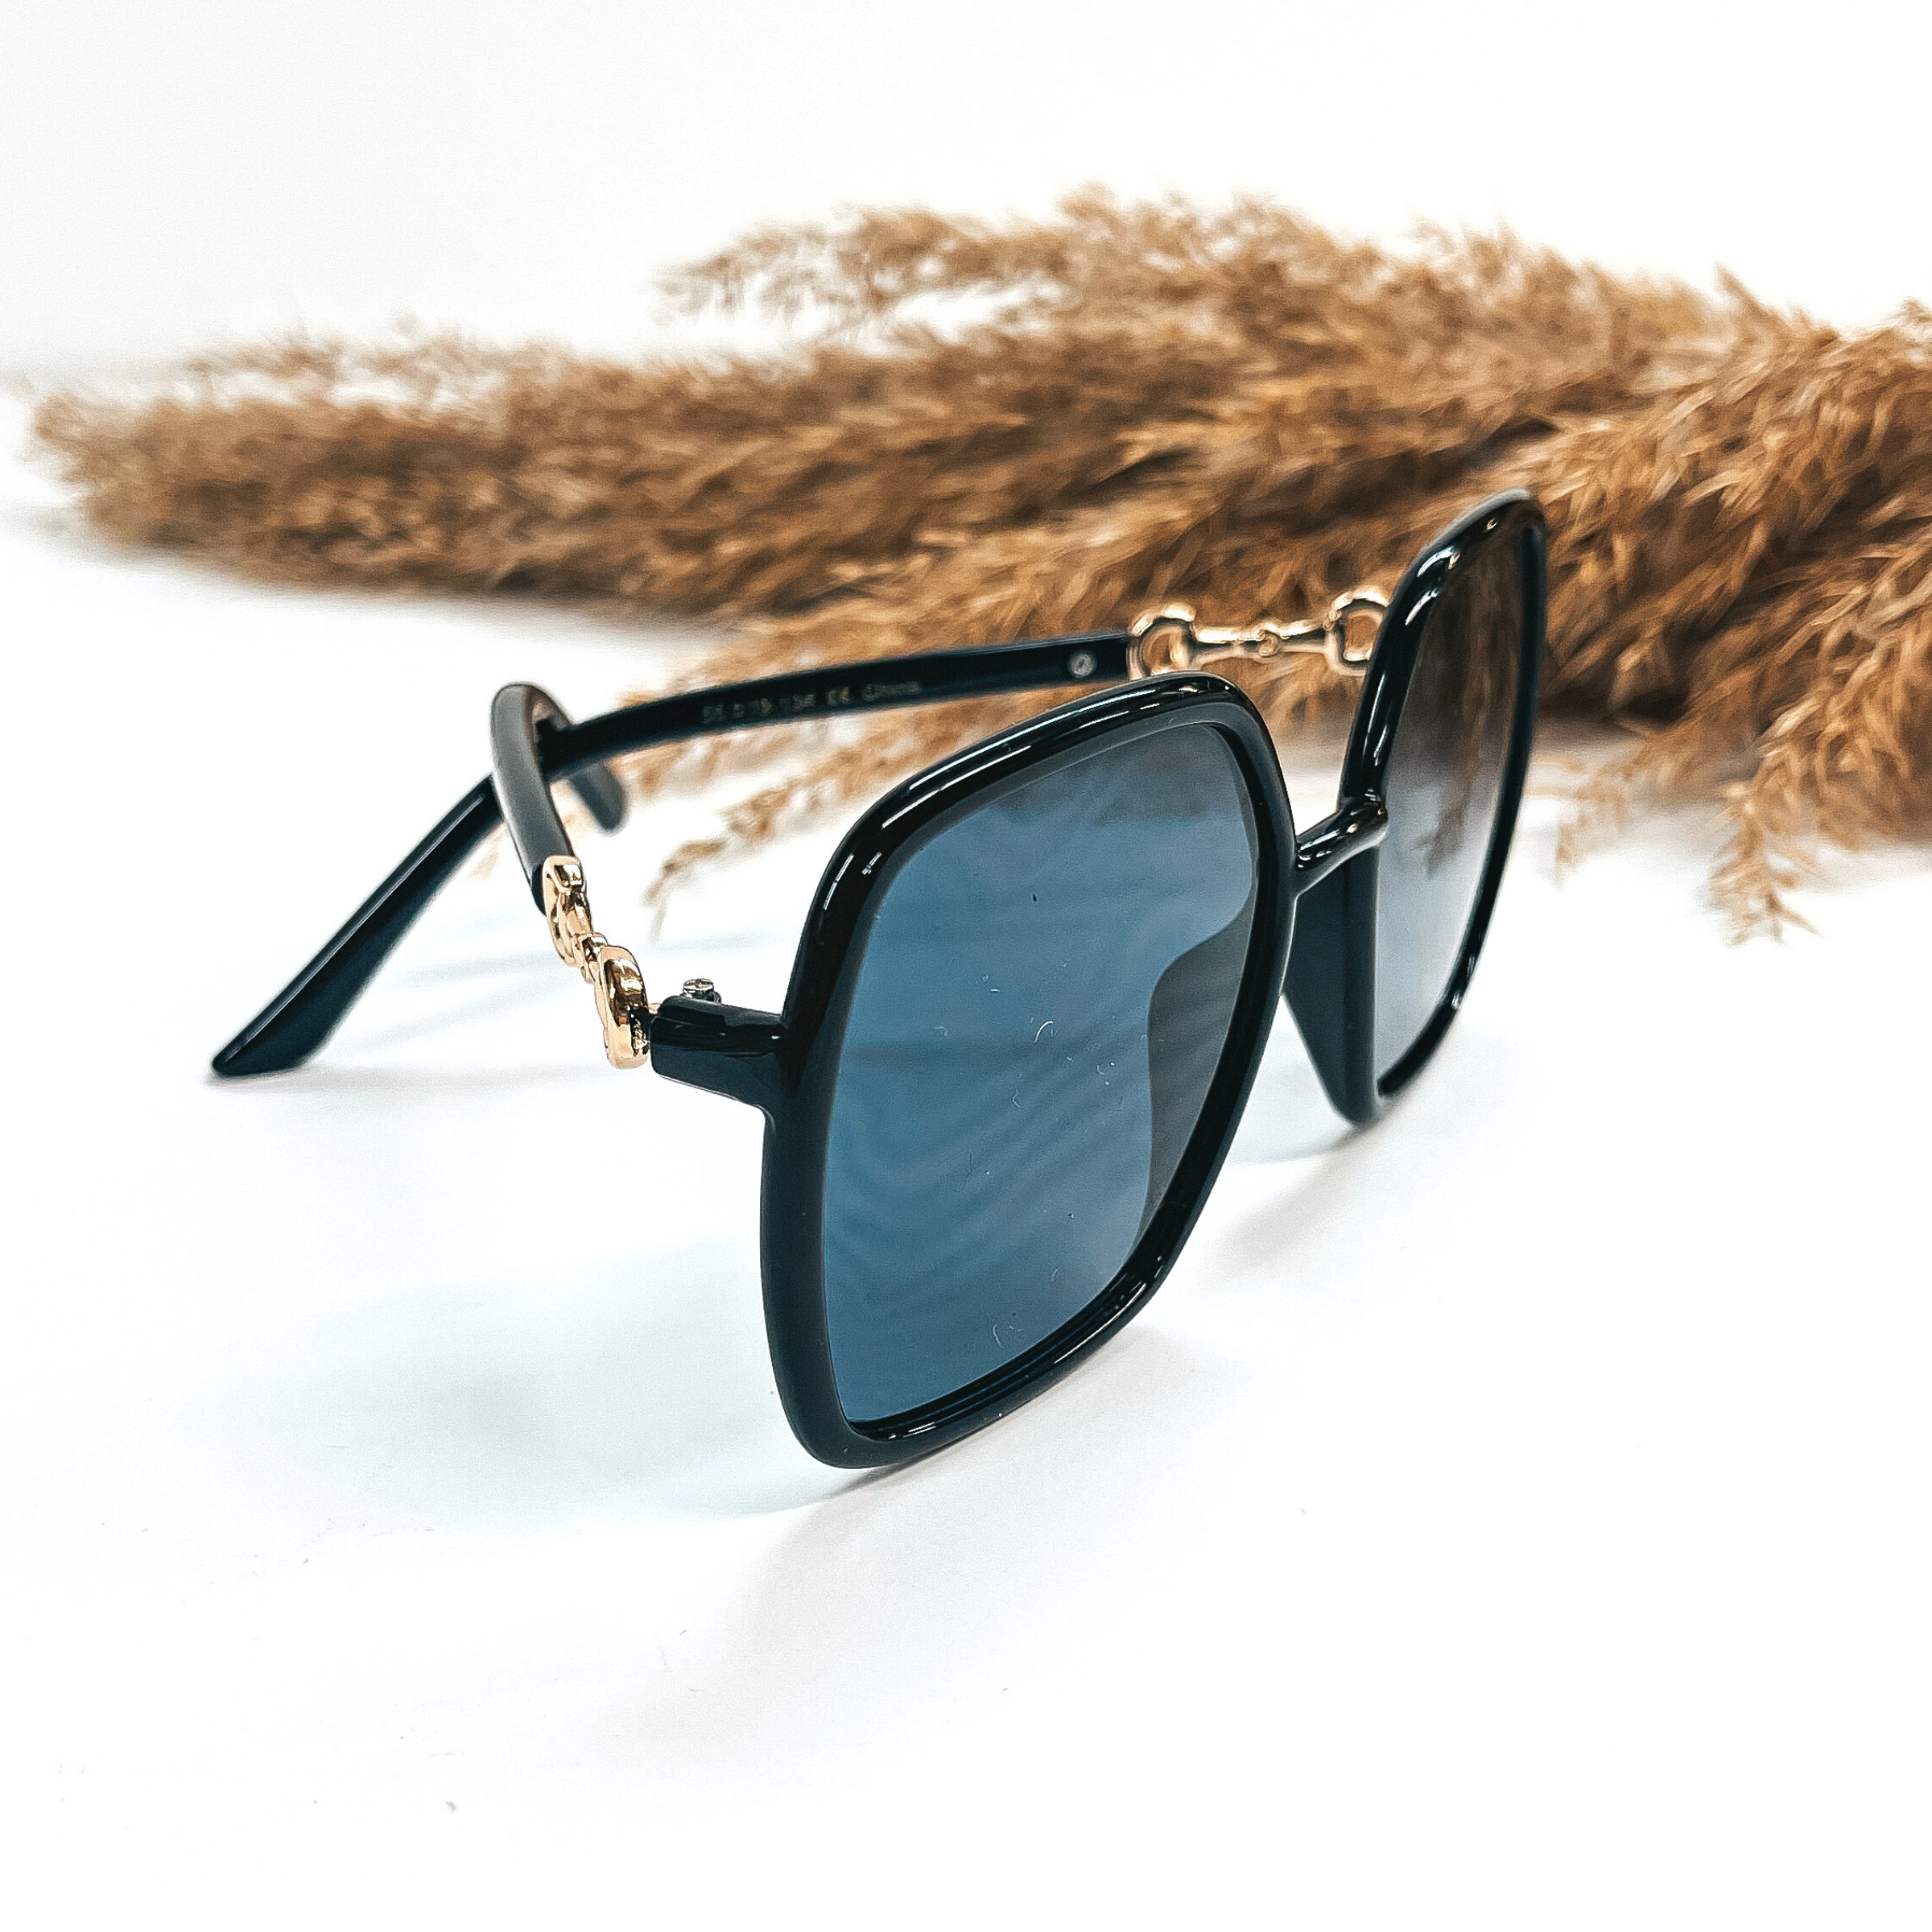 This is a pair of black, large, square sunglasses with a black/dark grey lense.  The side of the glasses have gold detailing as a connector. These pair of  sunglasses are taken on a white background with a brown plant in the back as decor.